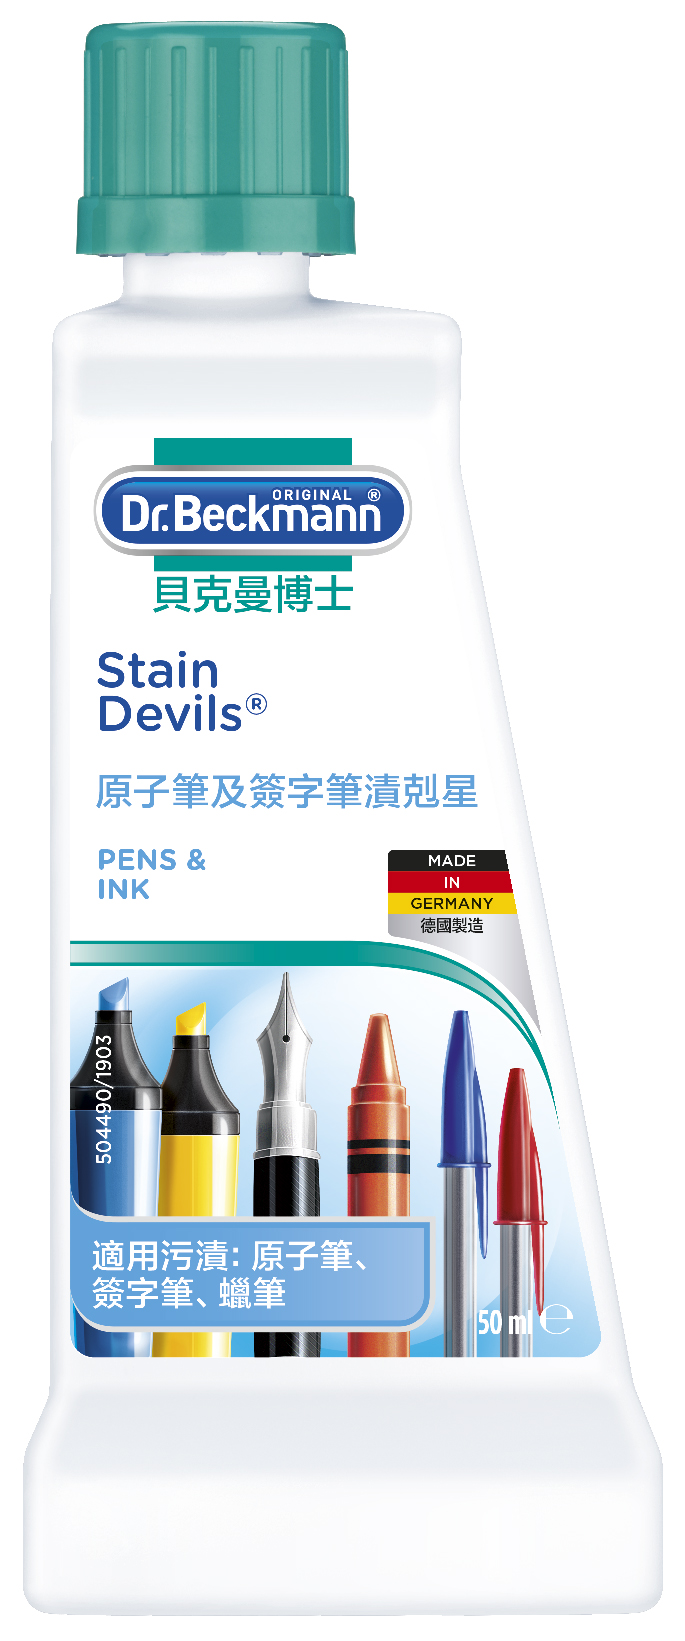 http://www.dr-beckmann.hk/images/product_stain_removal_05_new.jpg